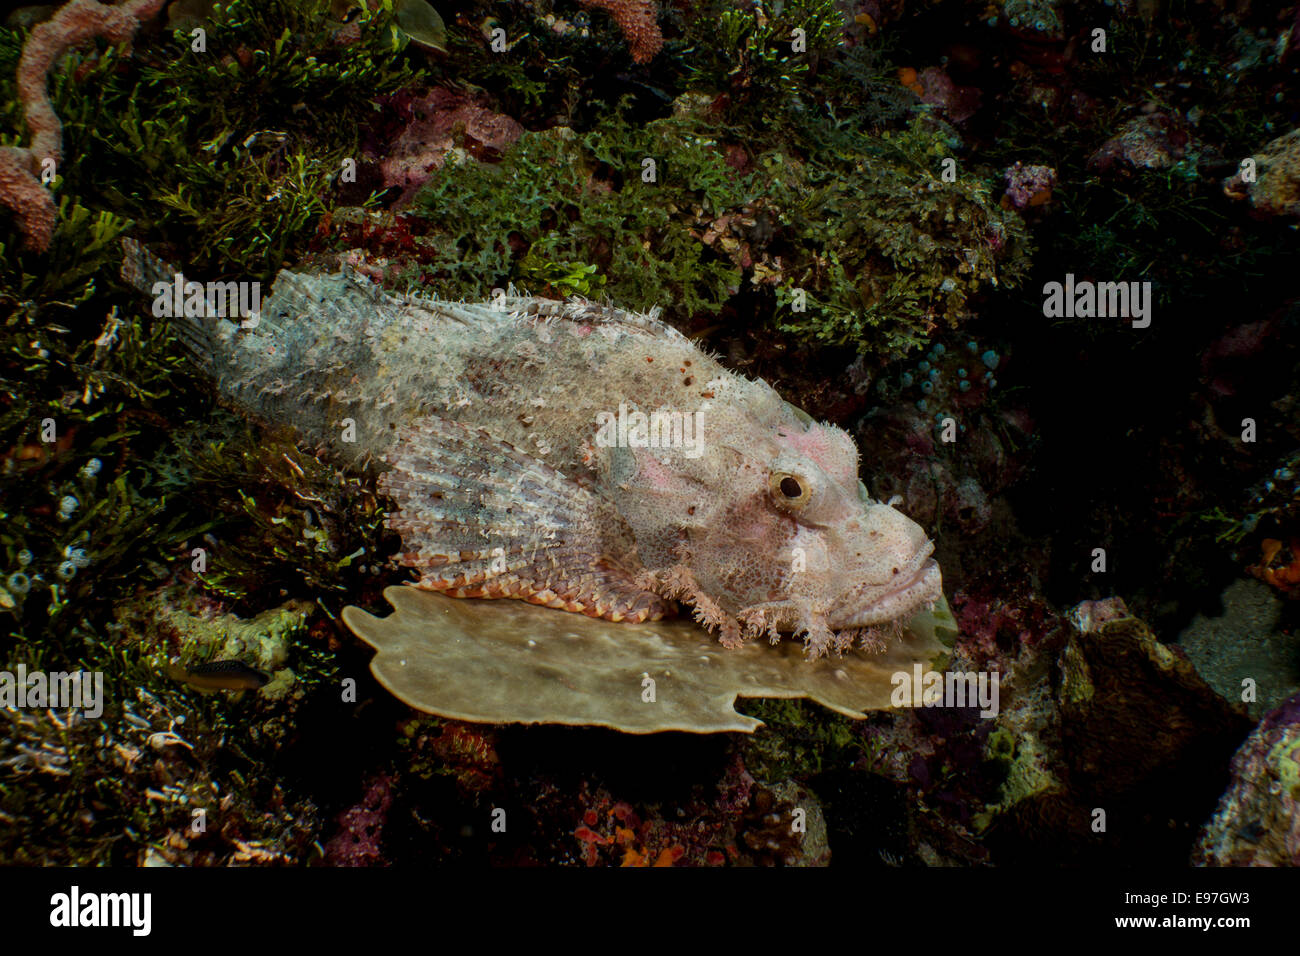 Tasseled scorpionfish rests on a coral reef. Stock Photo